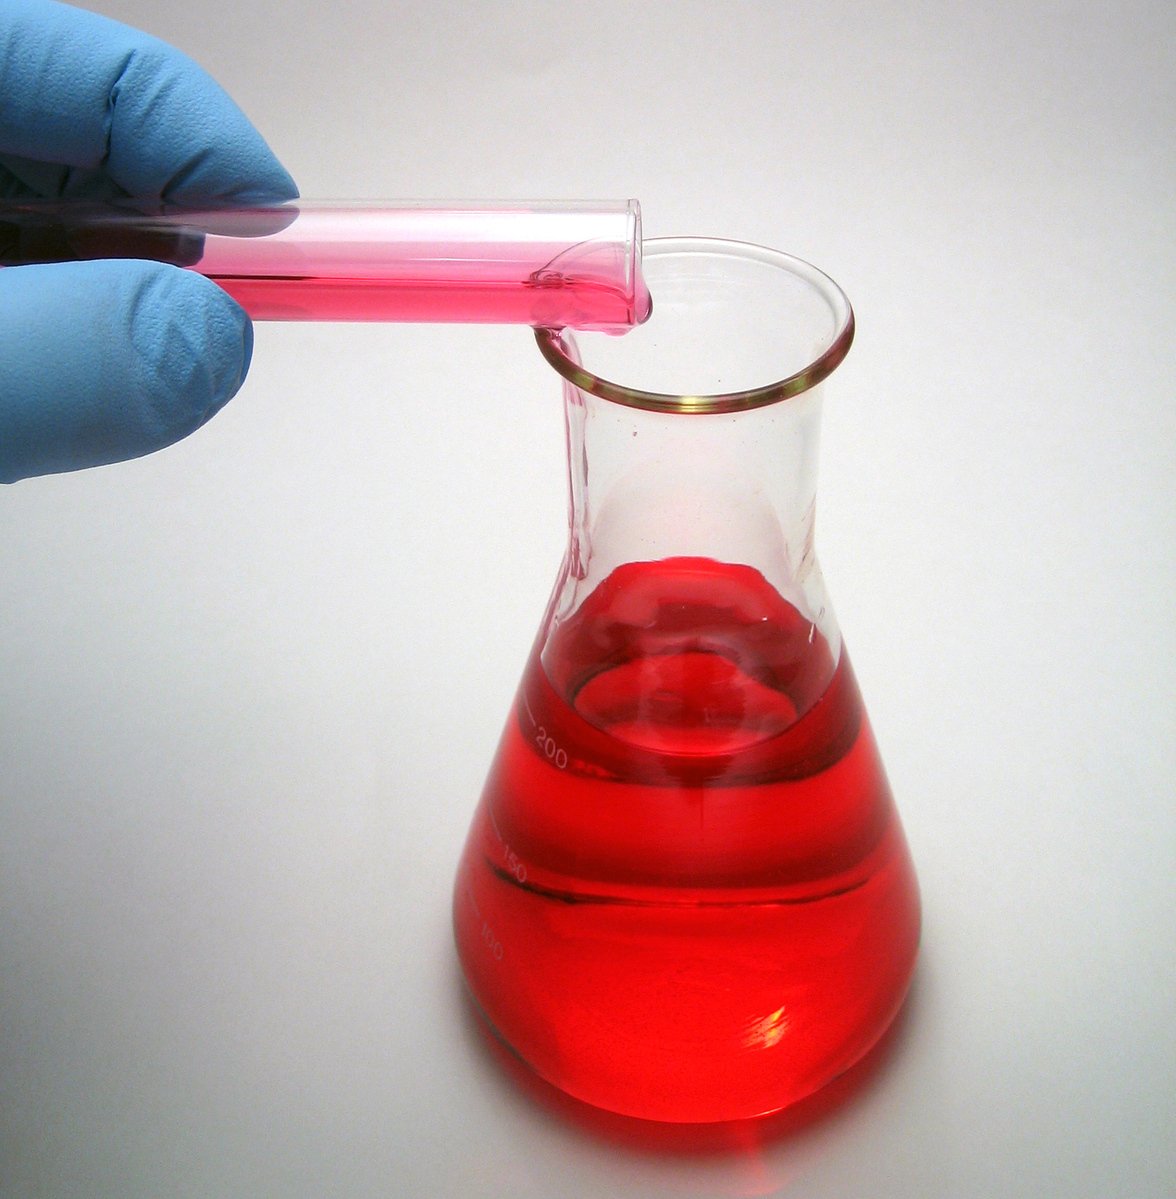 a test tube with a liquid filled with red liquid